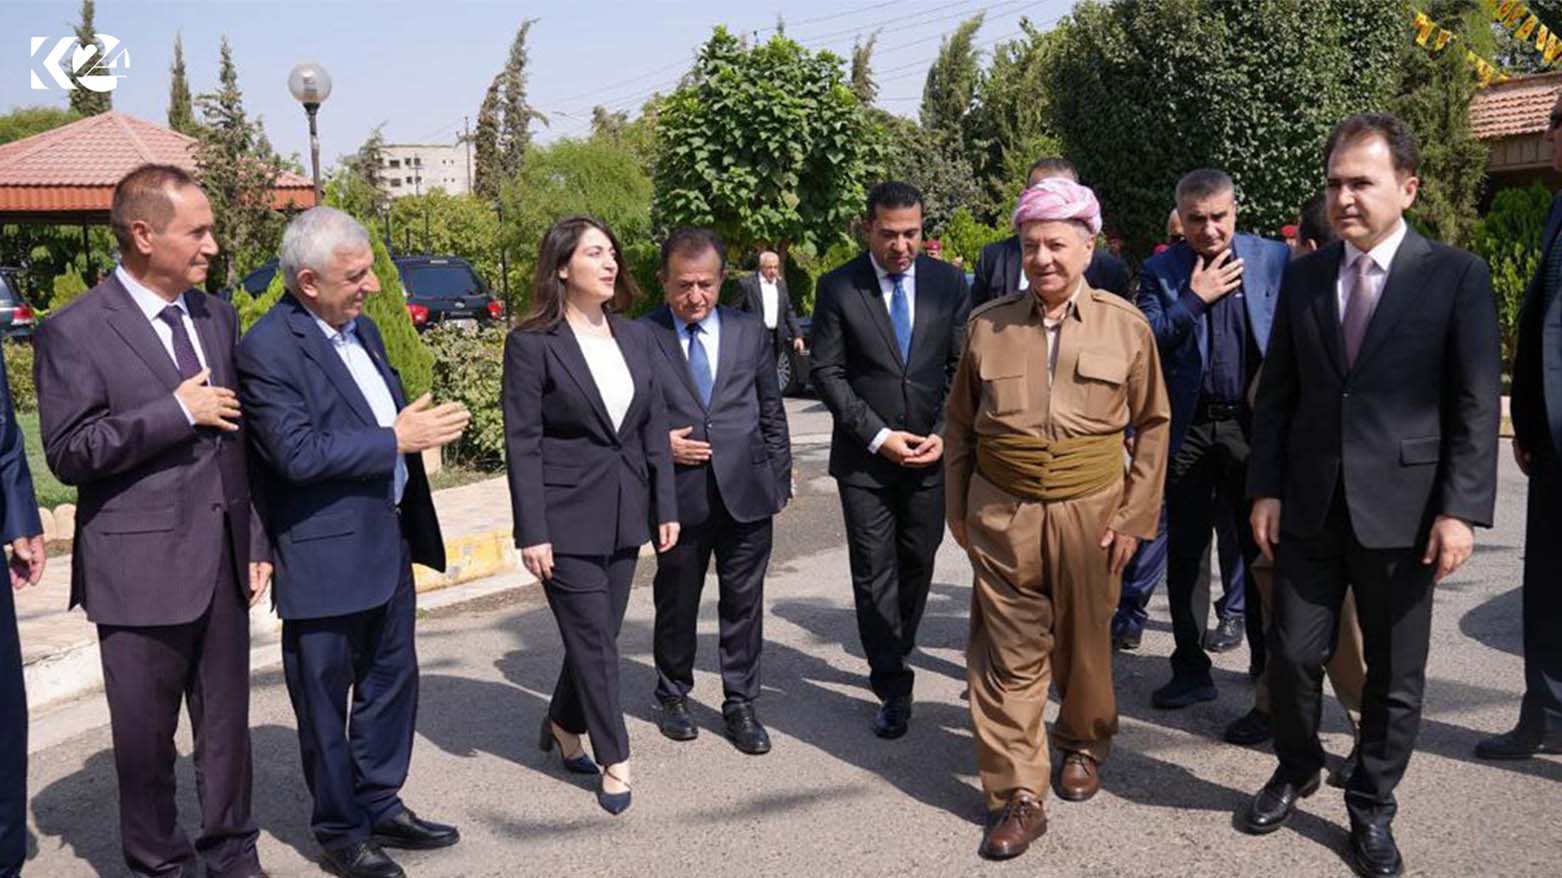 KDP President Masoud Barzani (second from right) greeted by local officials in Zakho, August 20, 2023. (Photo: Submitted to Kurdistan 24)